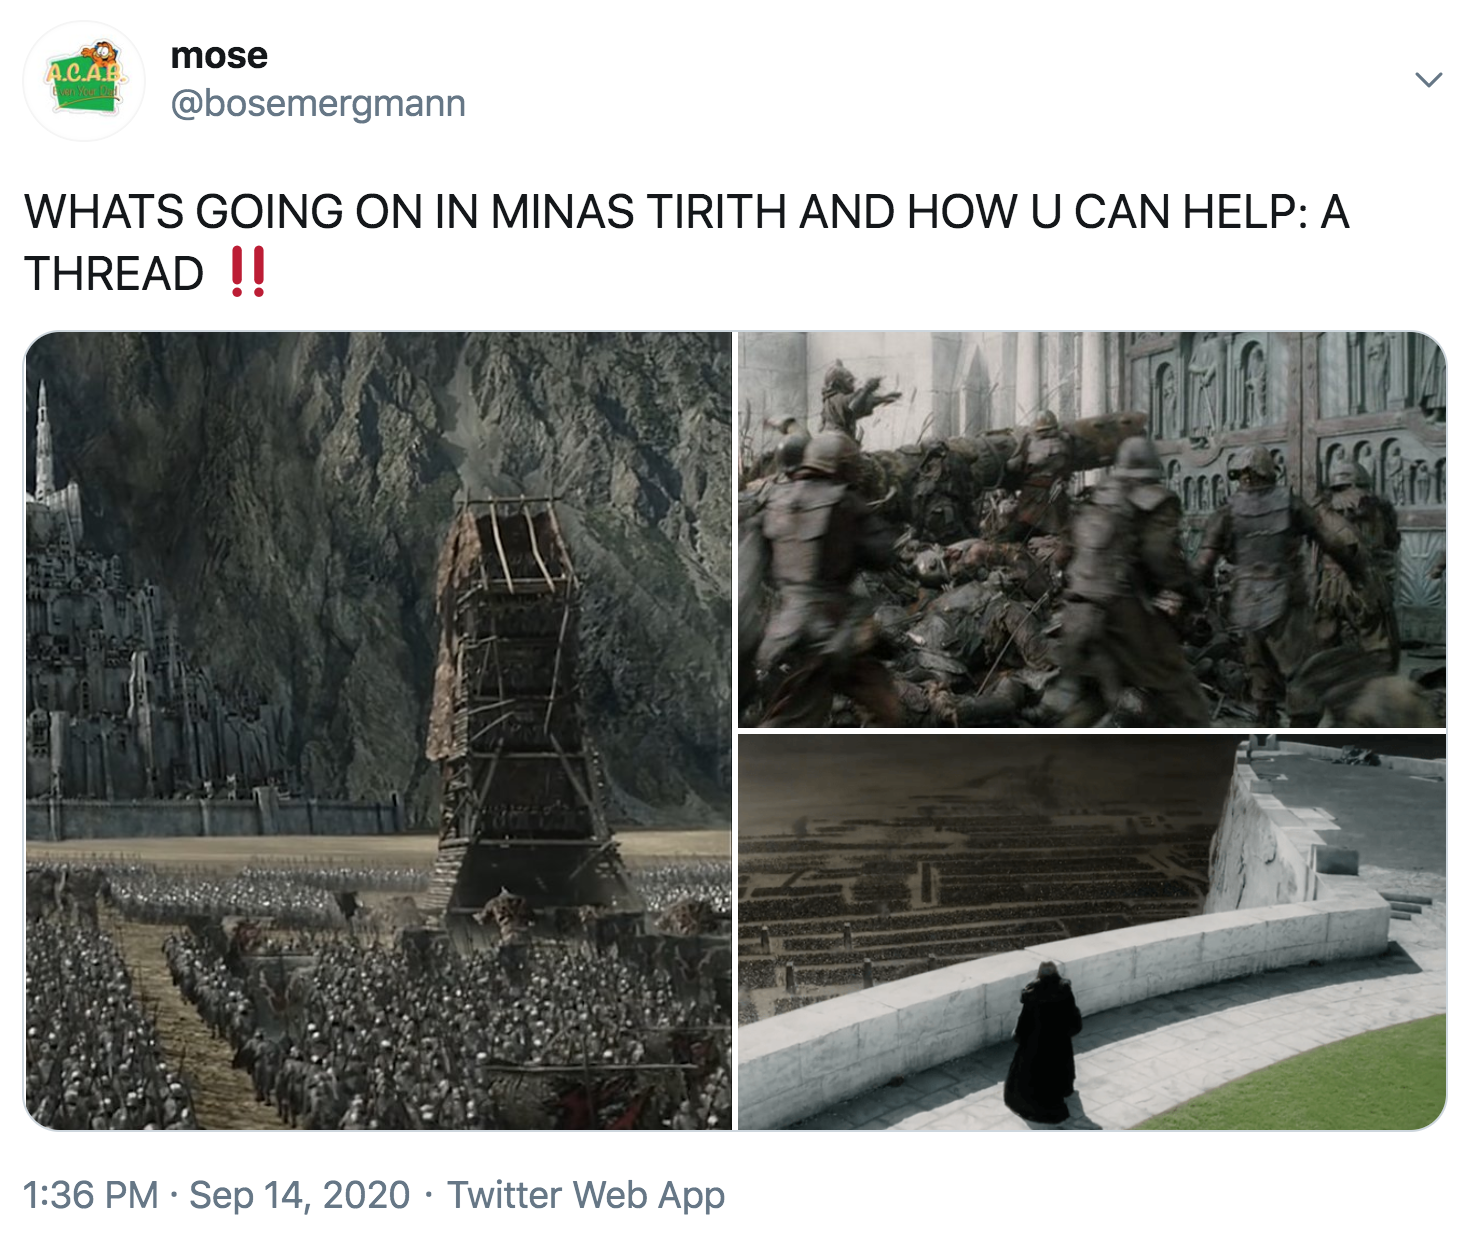 water resources - act mose Whats Going On In Minas Tirith And How U Can Help A Thread !! . . Twitter Web App